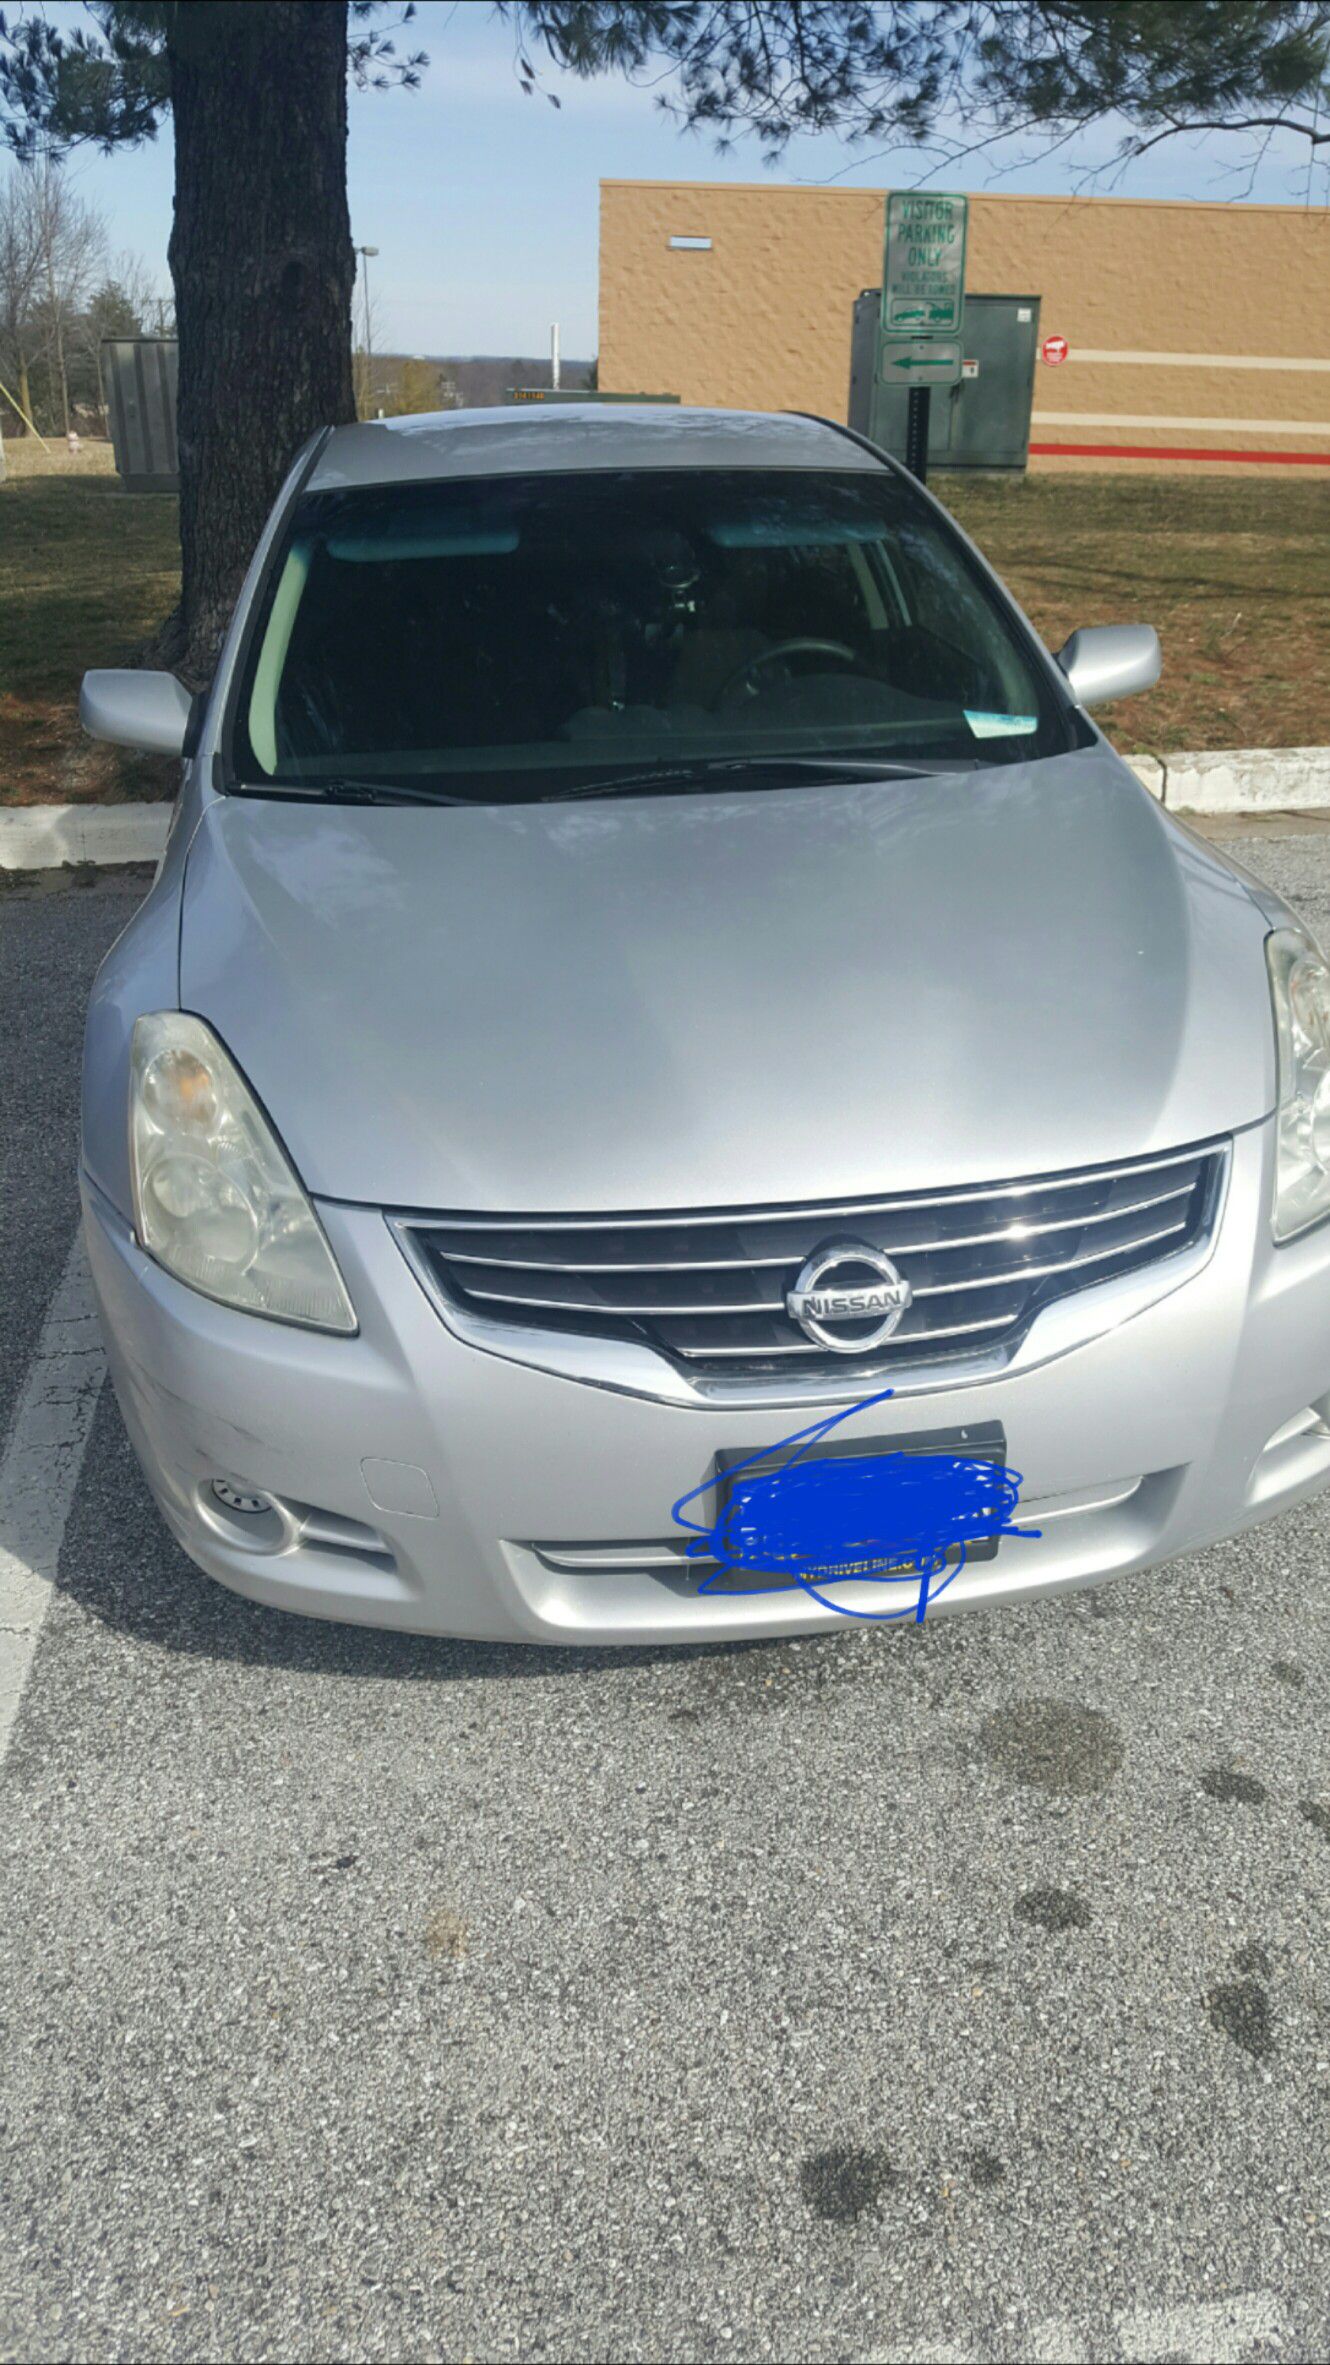 Nissan altima for sell need front engine mount O2 sensor light need fix